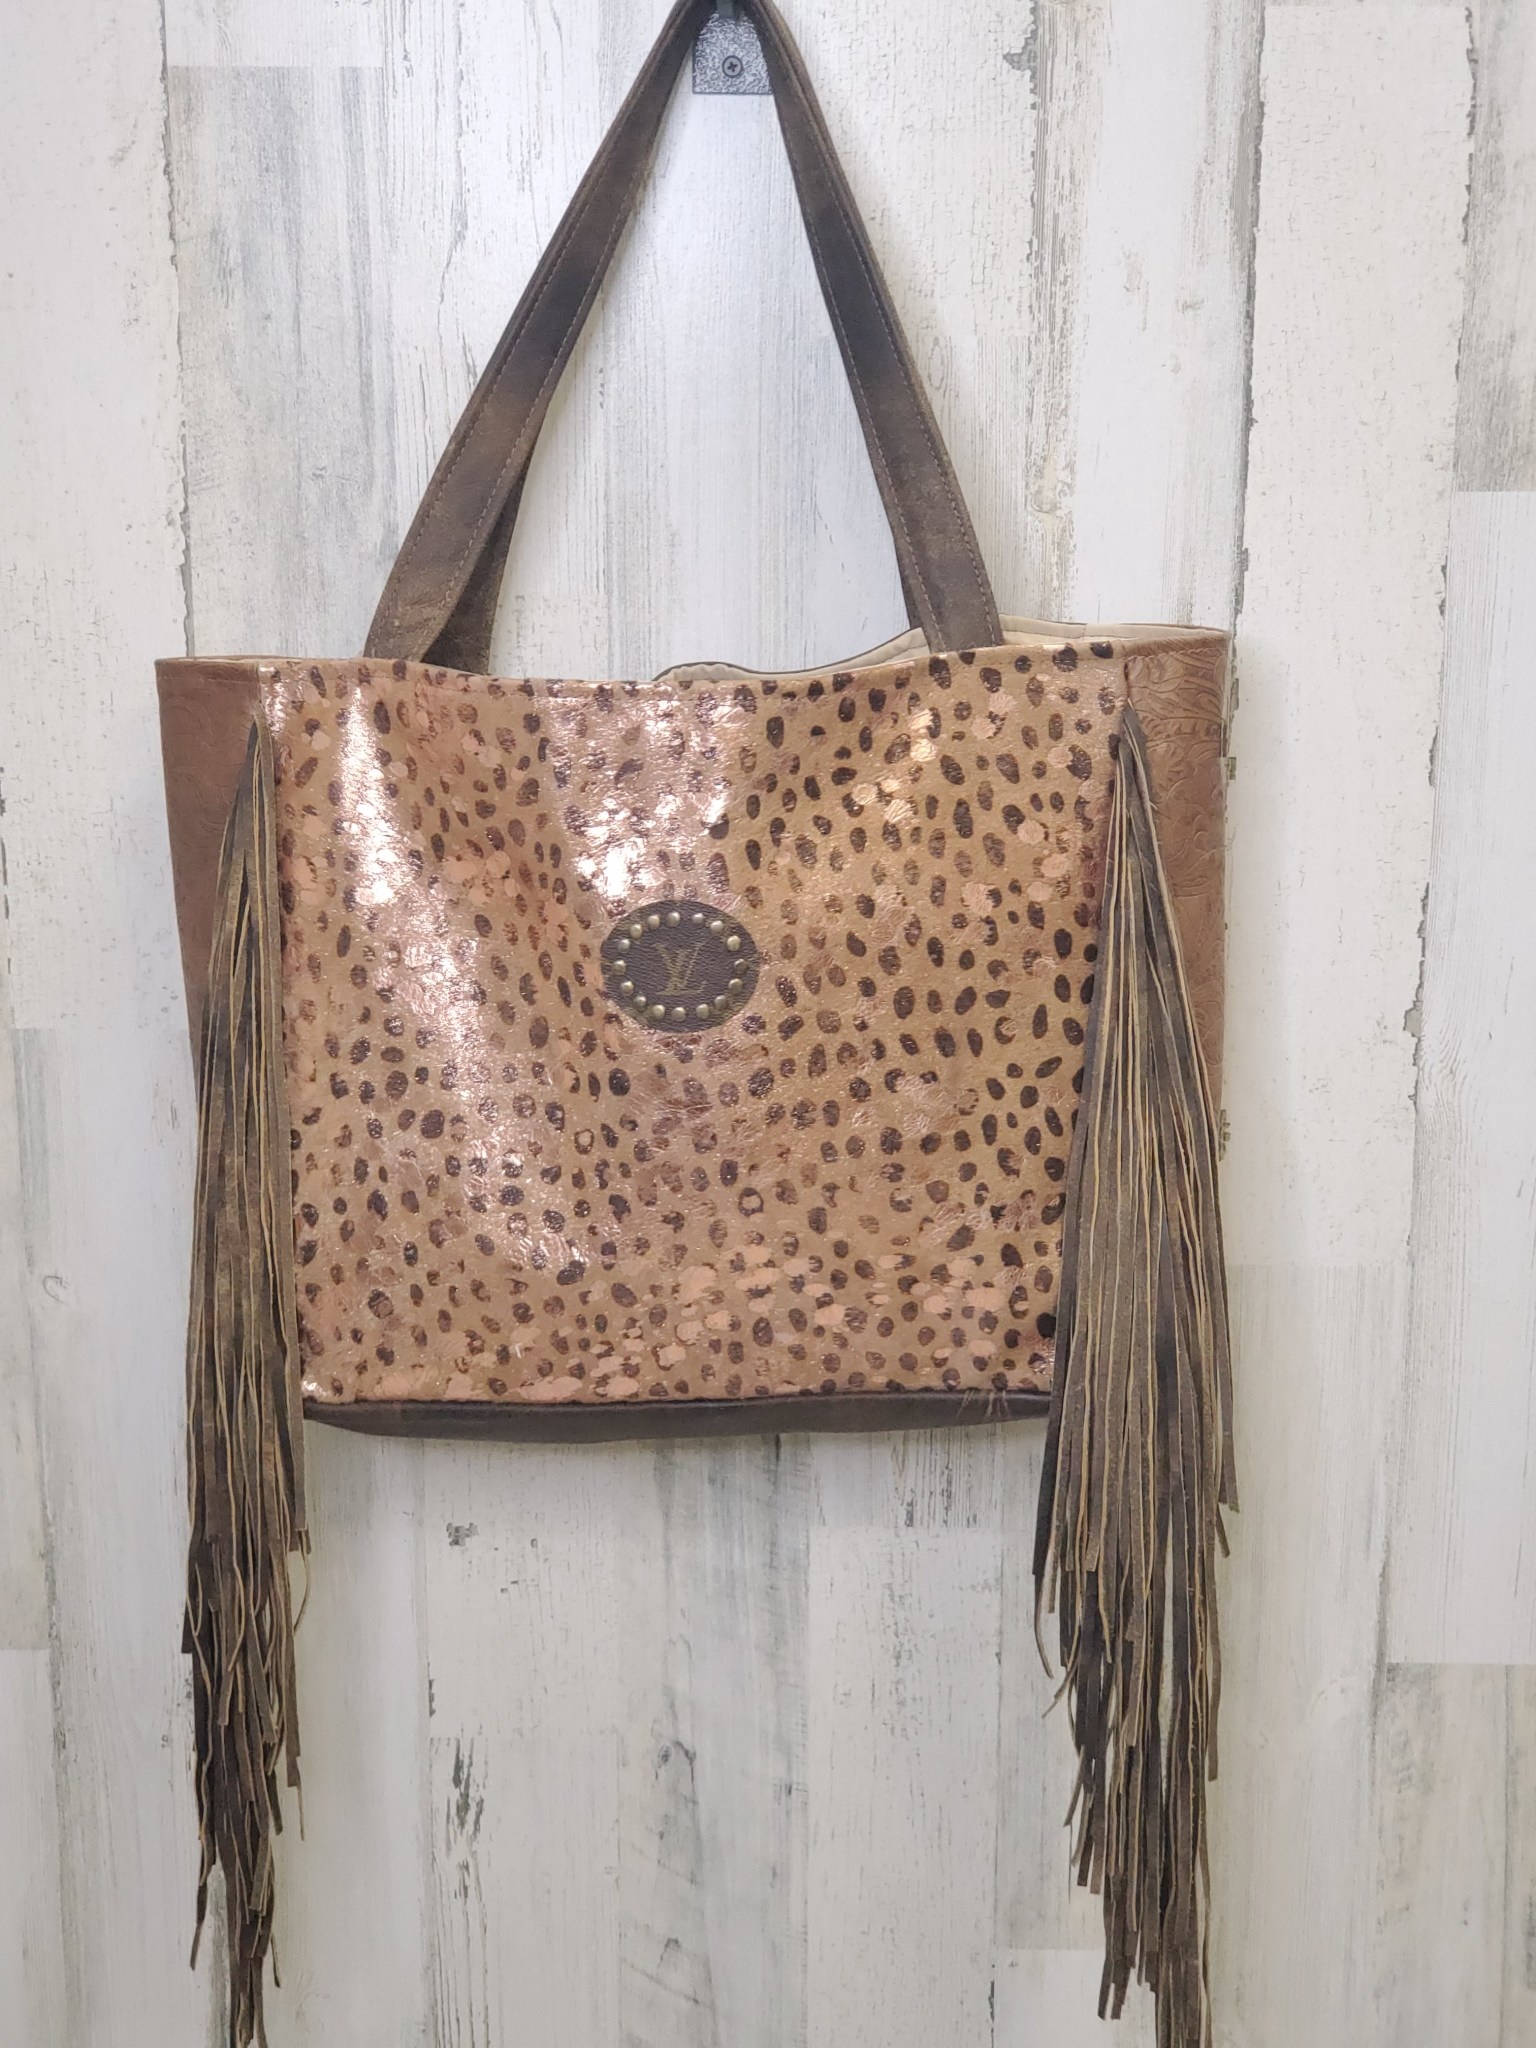 Upcycled LV dust bag - My Sister's Closet Consignment Shop